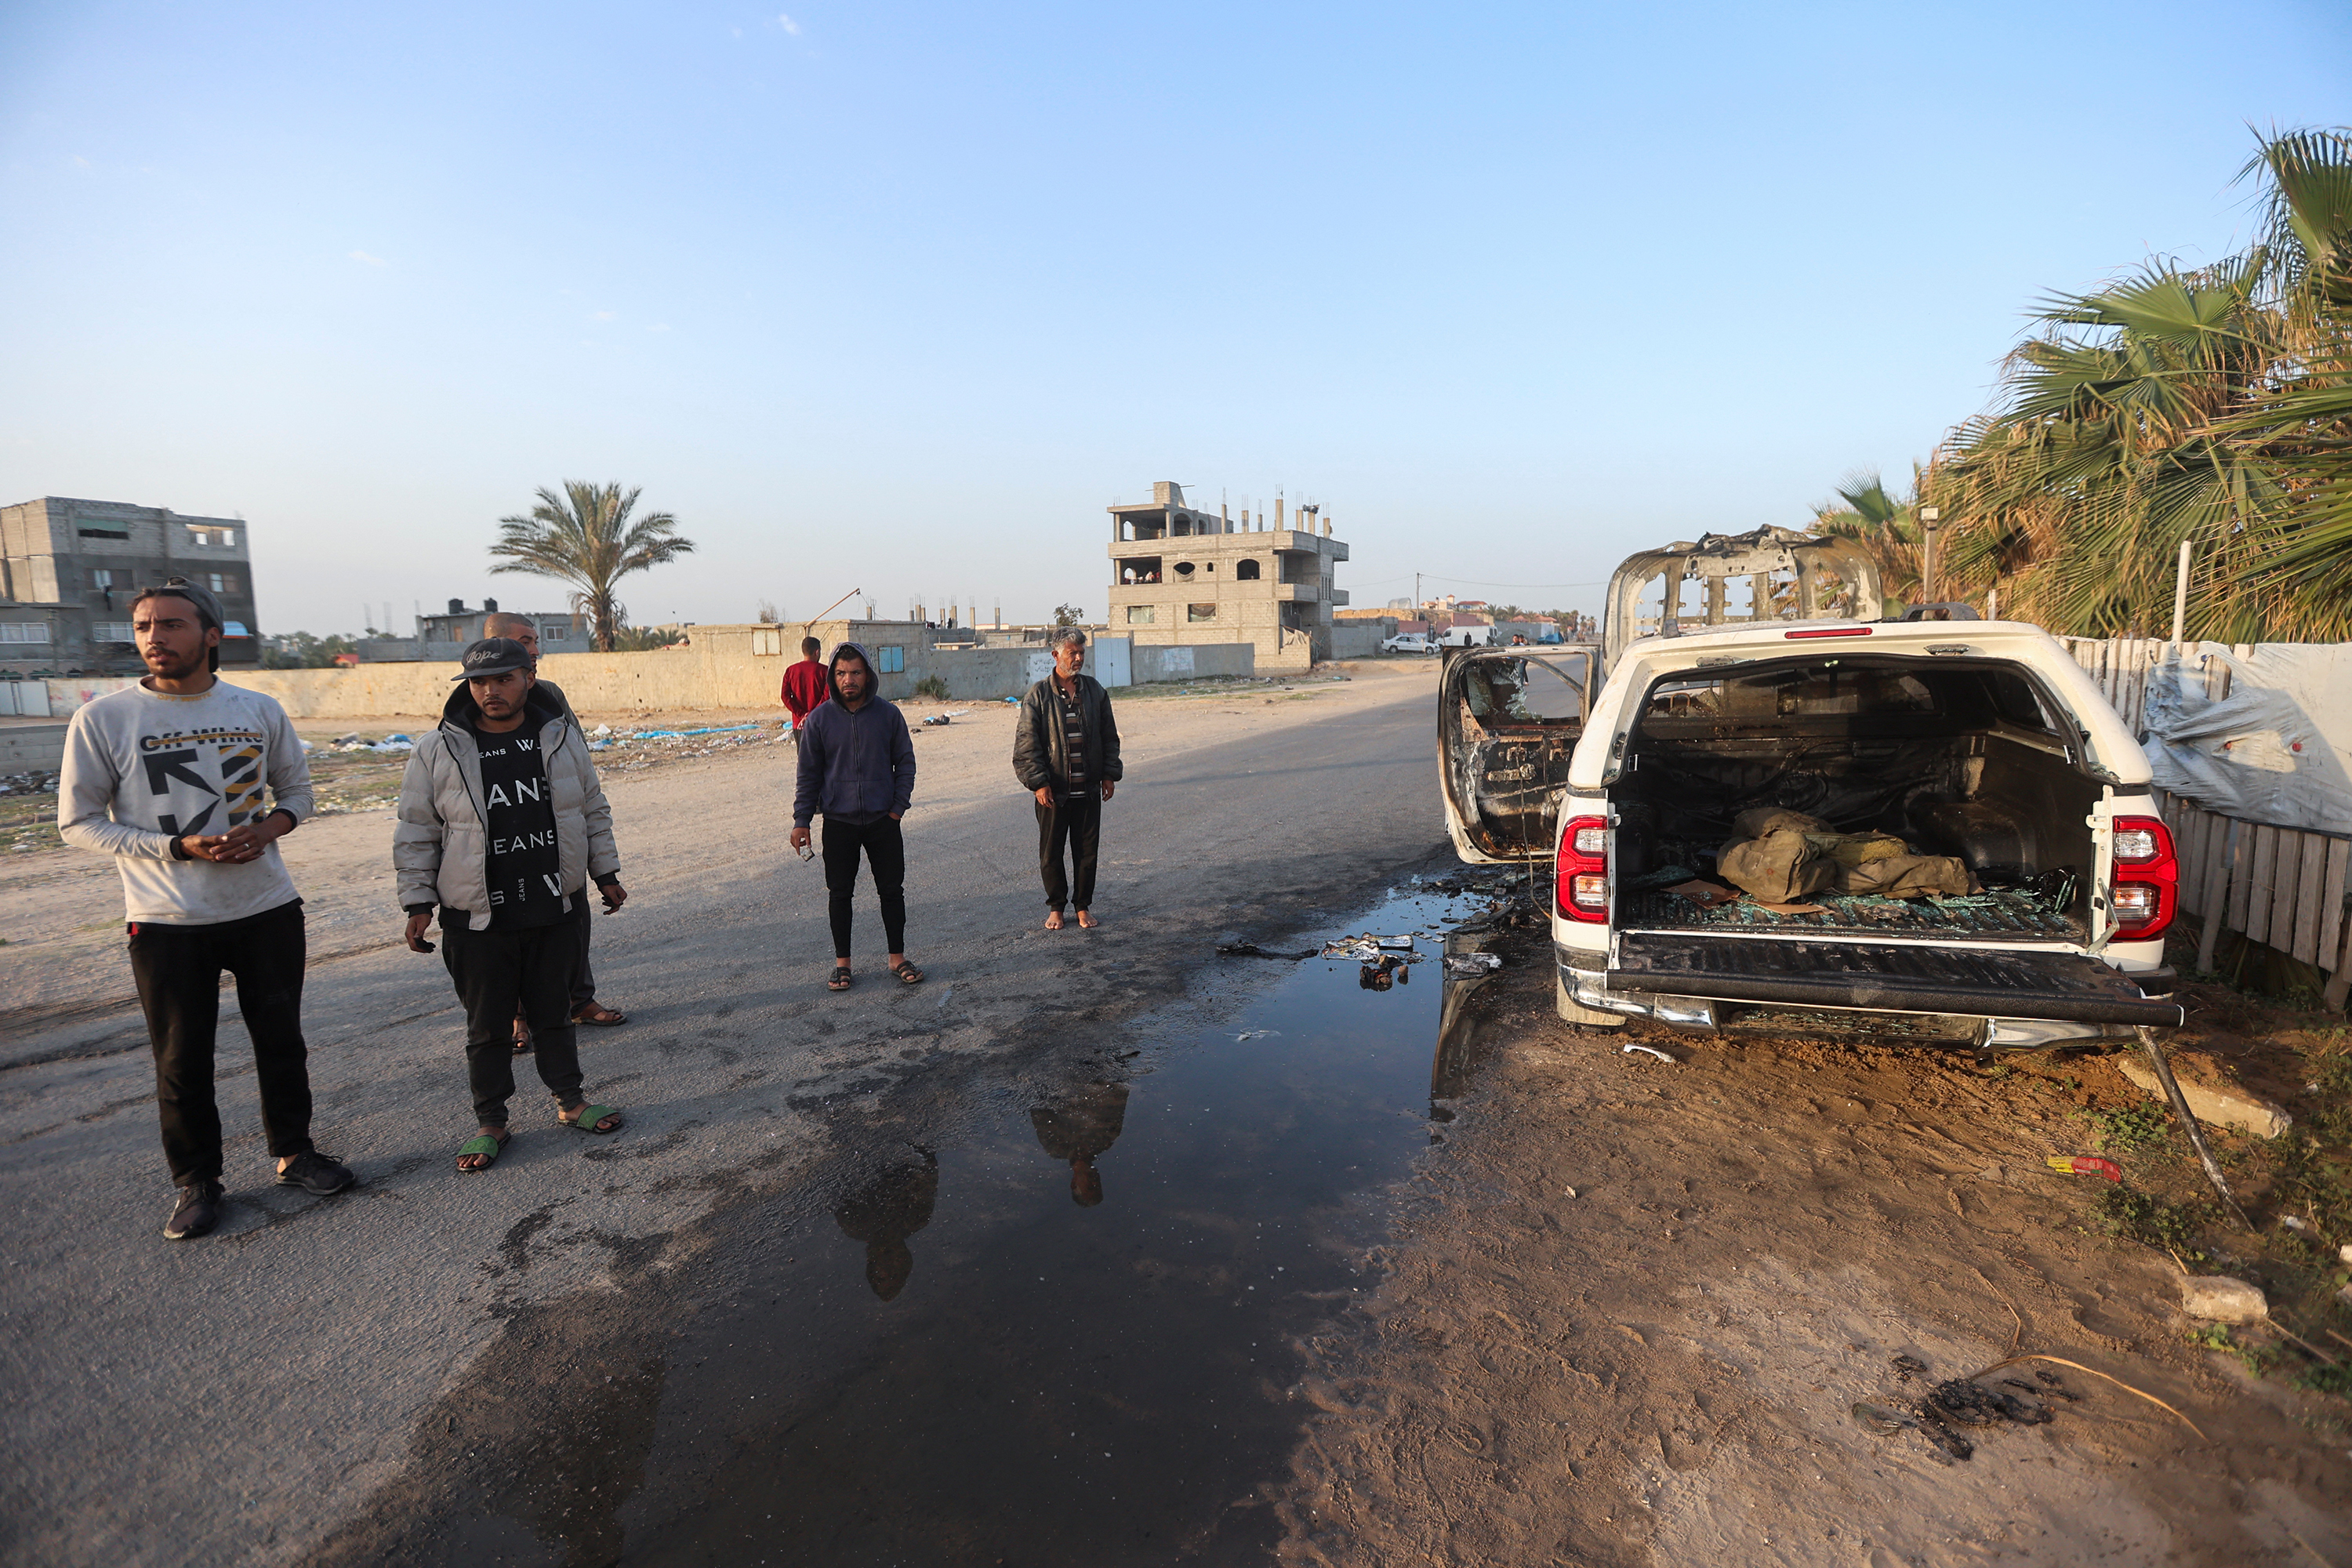 Palestinians stand next to a vehicle where employees from the World Central Kitchen (WCK), including foreigners, were killed in an Israeli airstrike in central Gaza, on April 2.